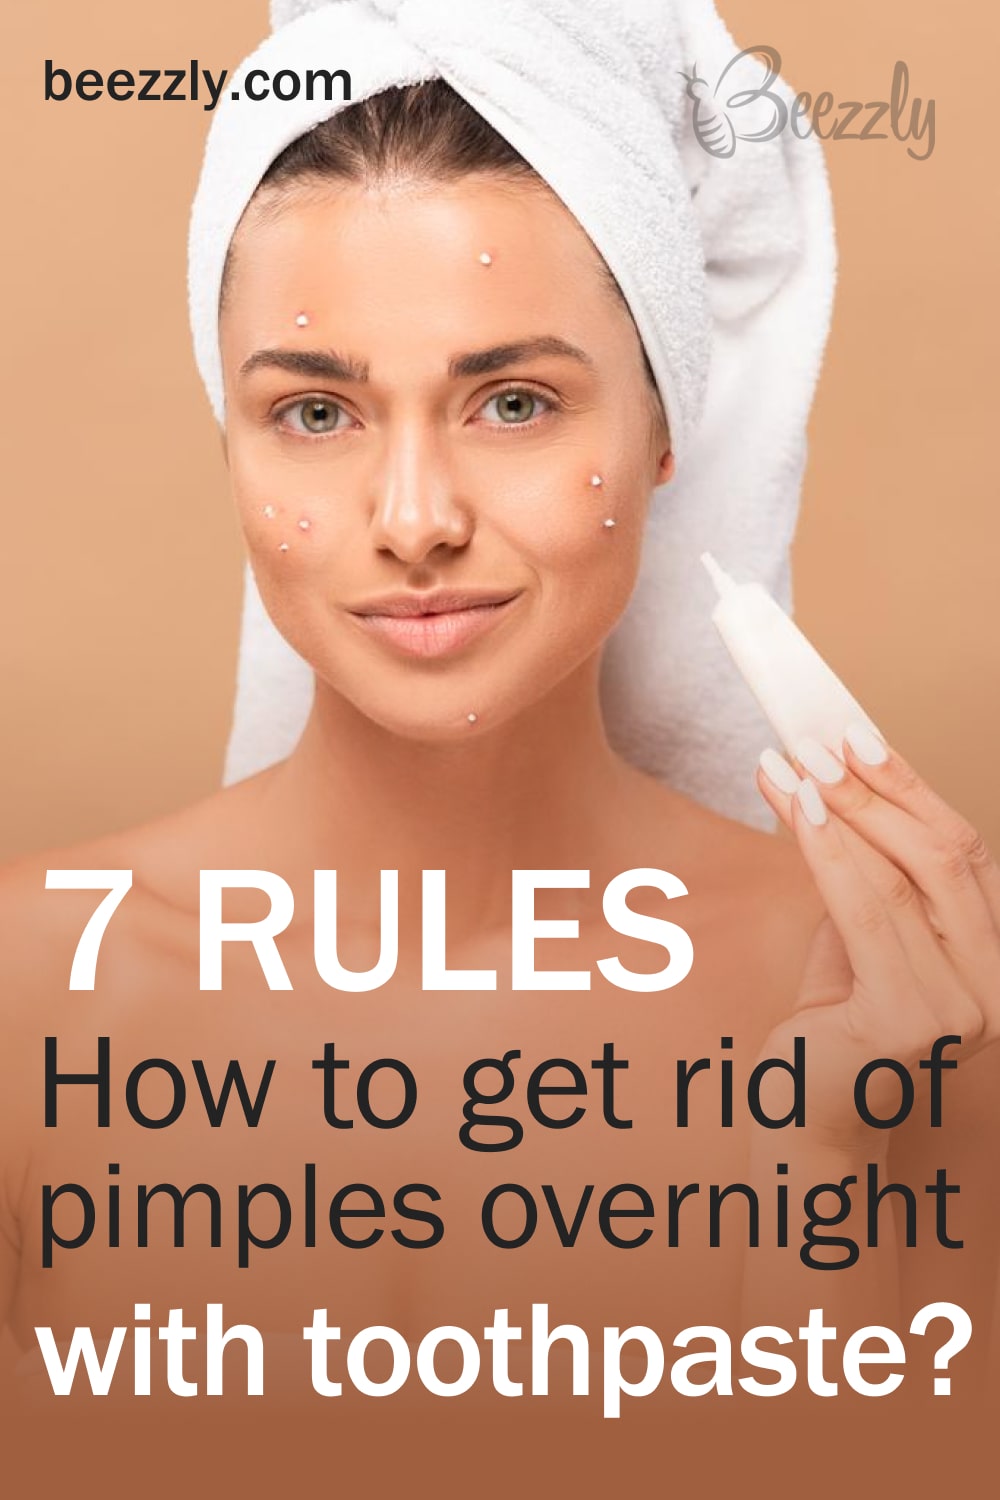 How to Get Rid of Pimples With Toothpaste